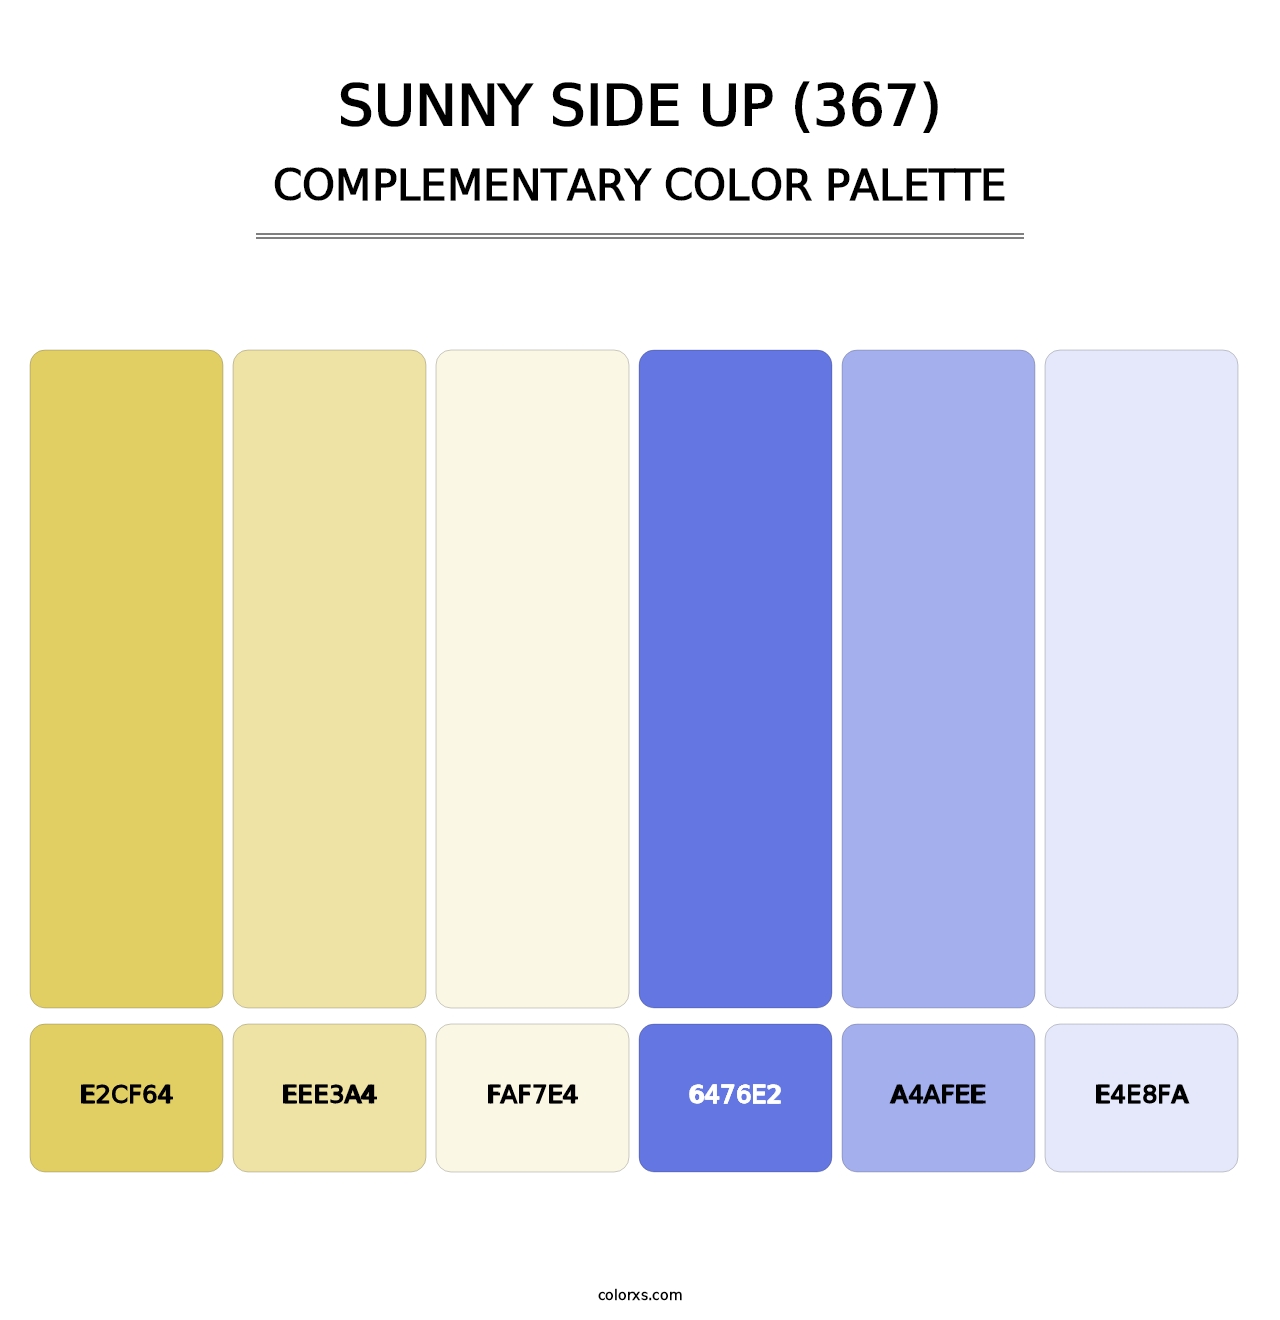 Sunny Side Up (367) - Complementary Color Palette